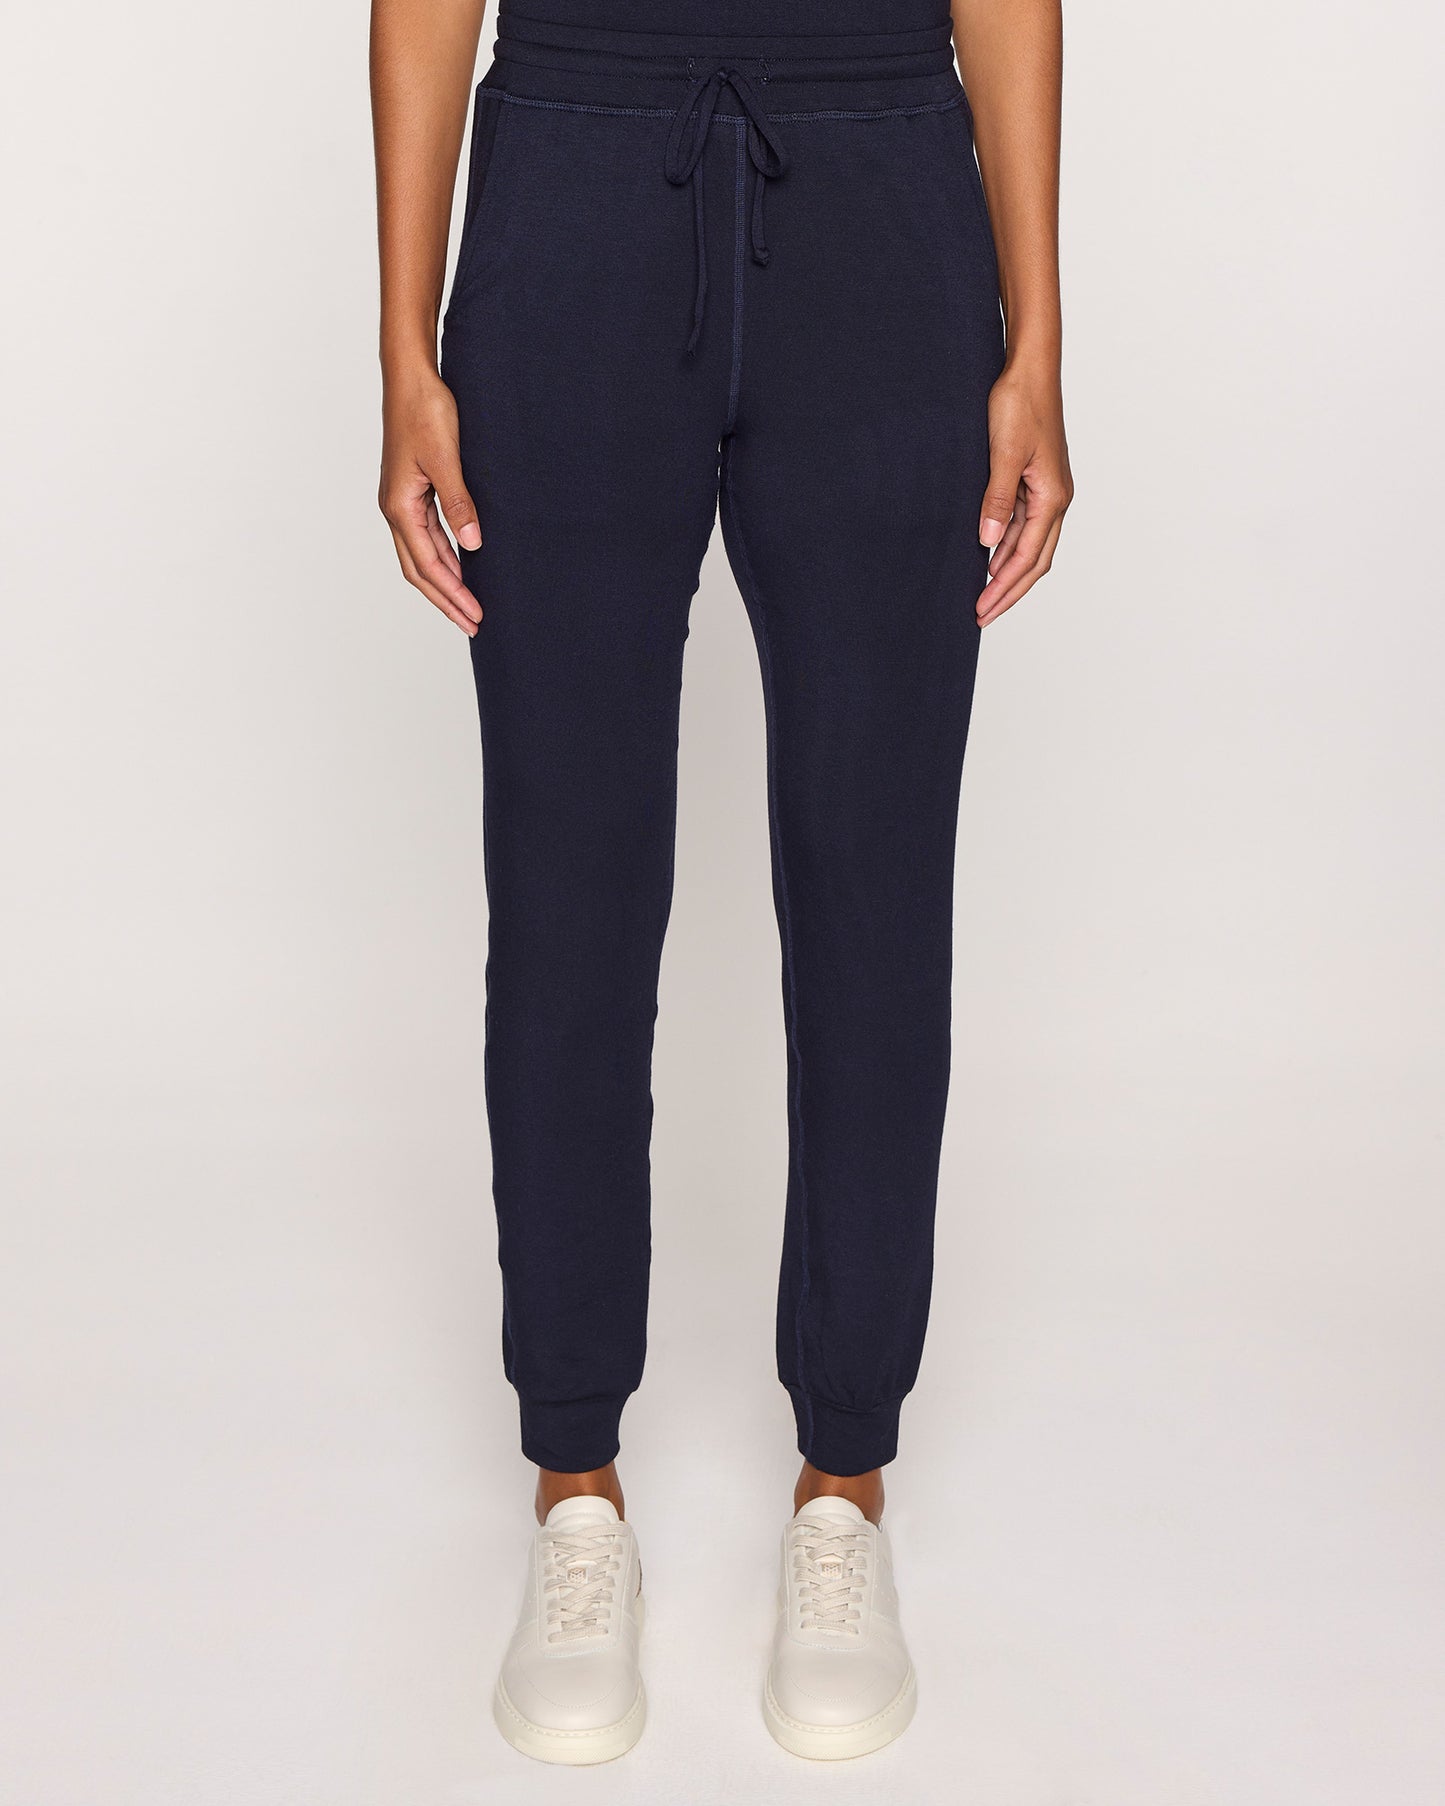 Navy | The Women's Elevated Jogger Front